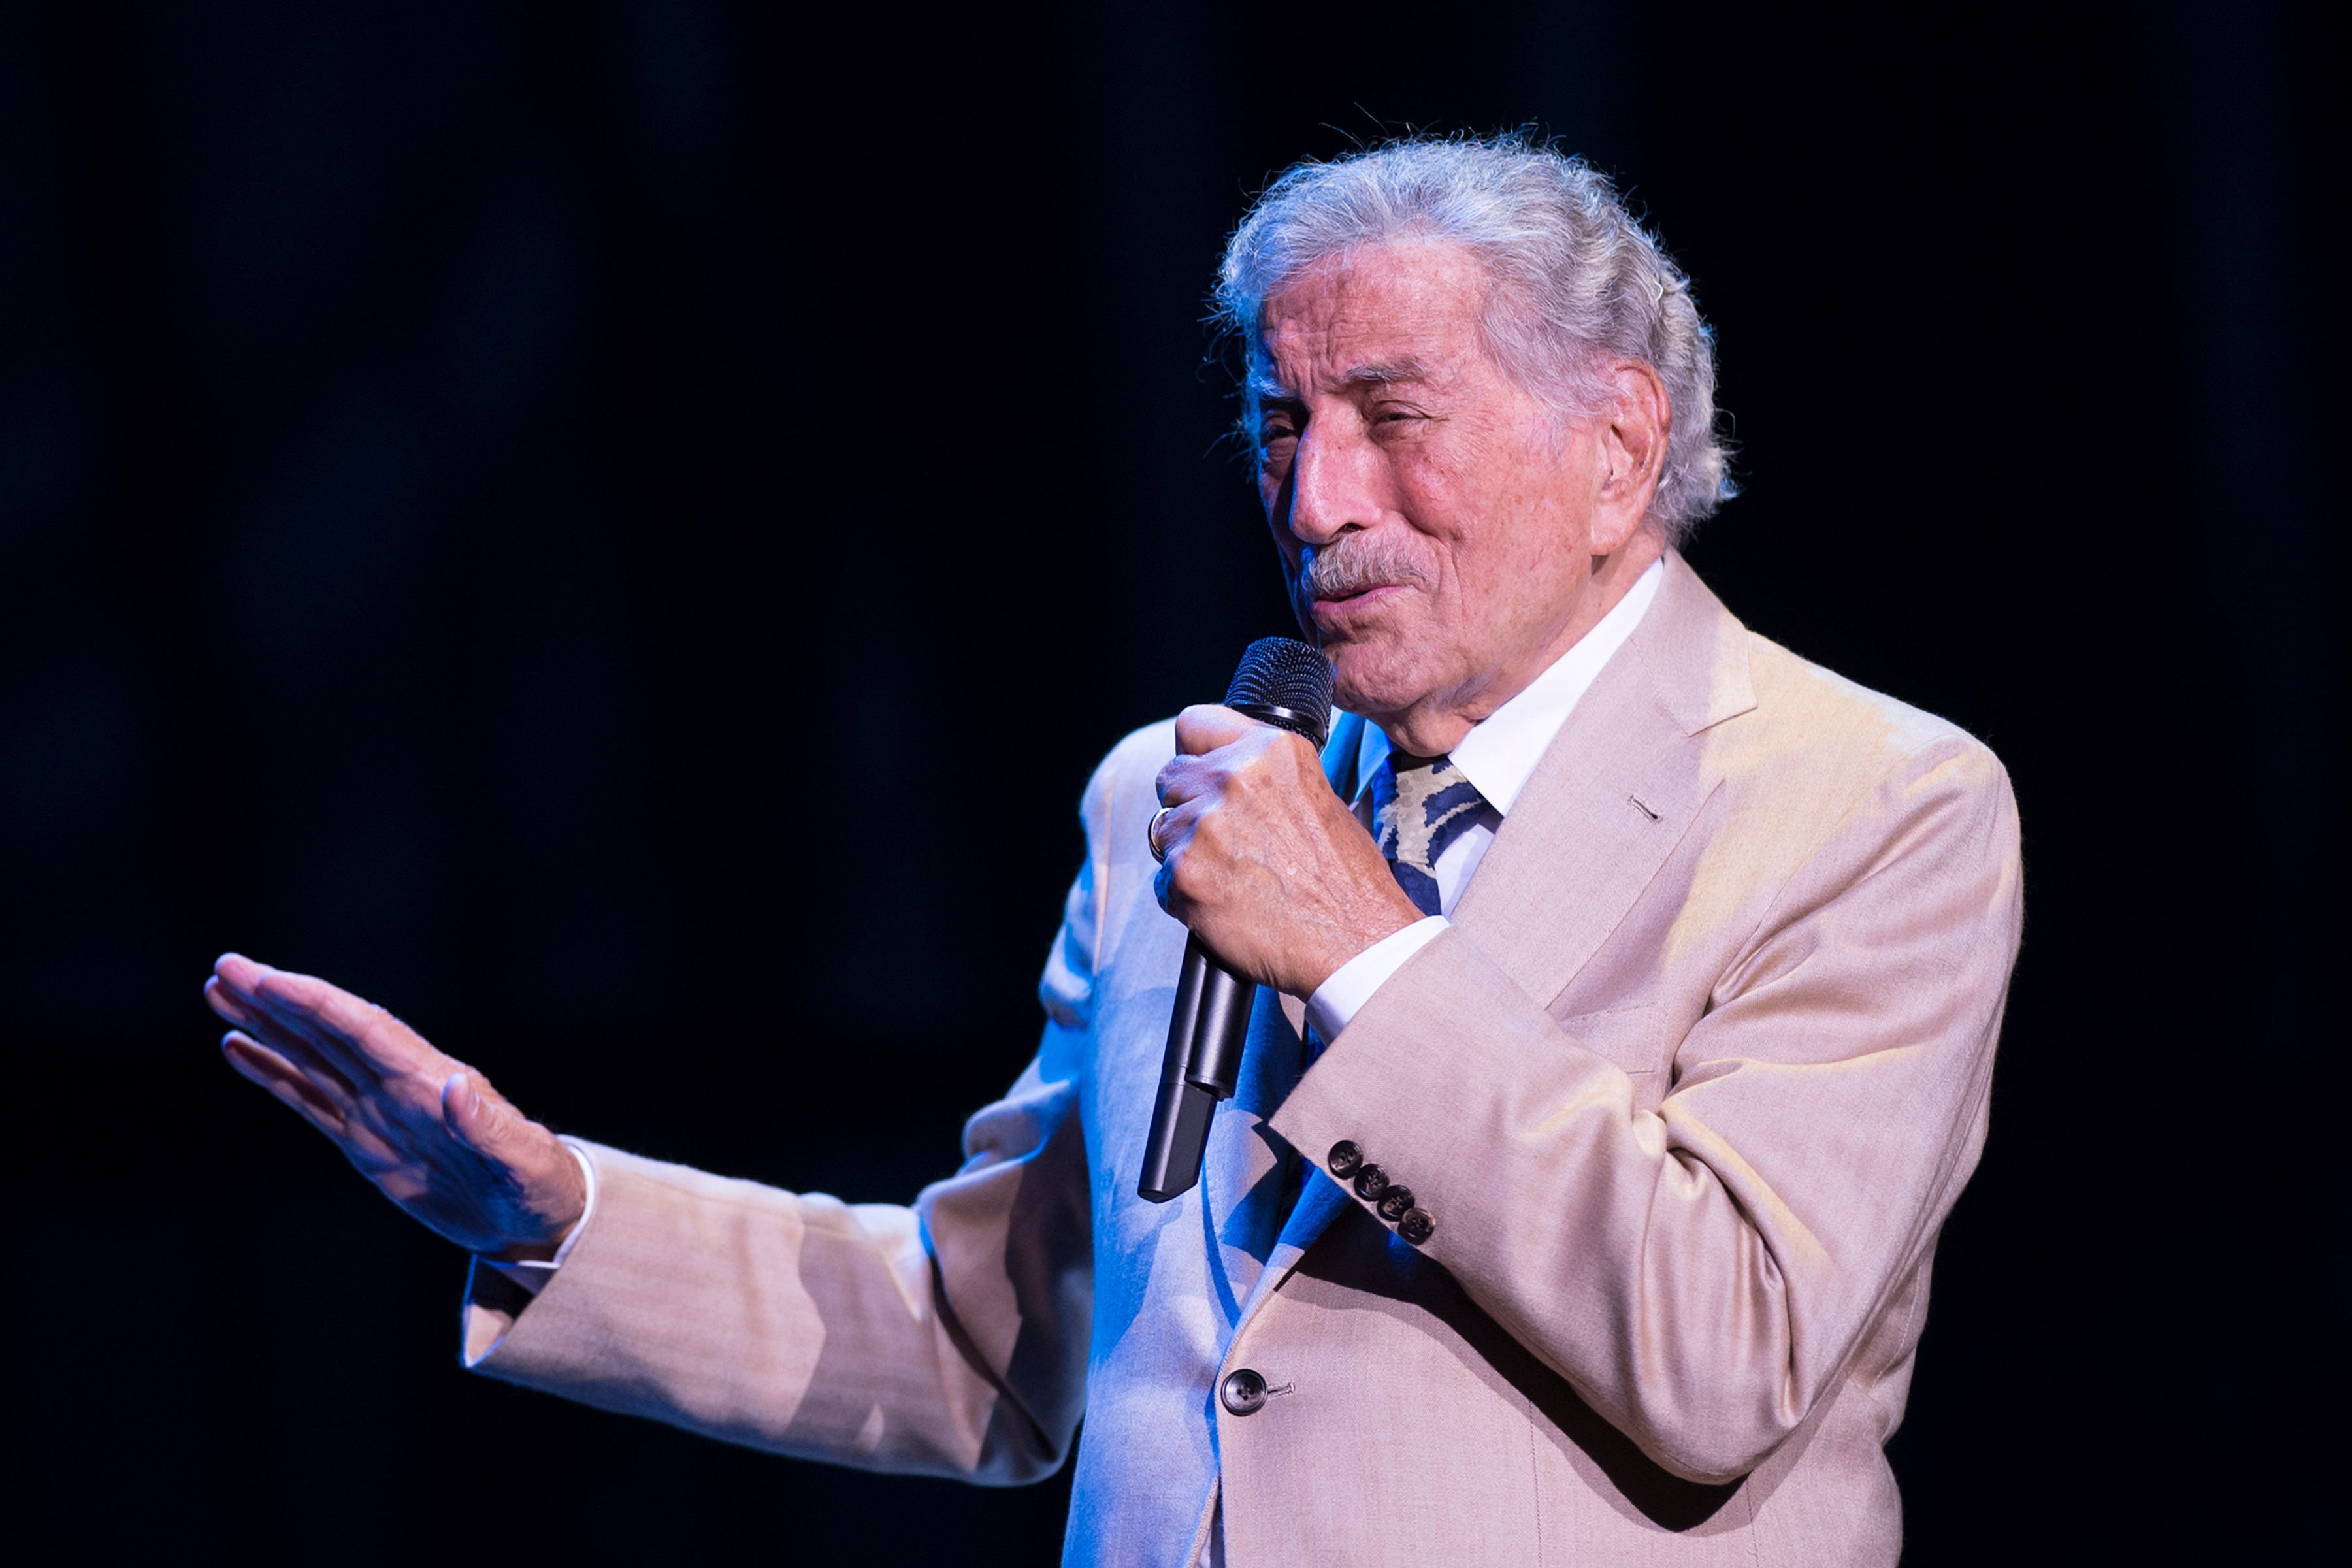 Tony Bennett performs on stage at Royal Albert Hall on June 28, 2019 in London, England. | Photo: Getty Images